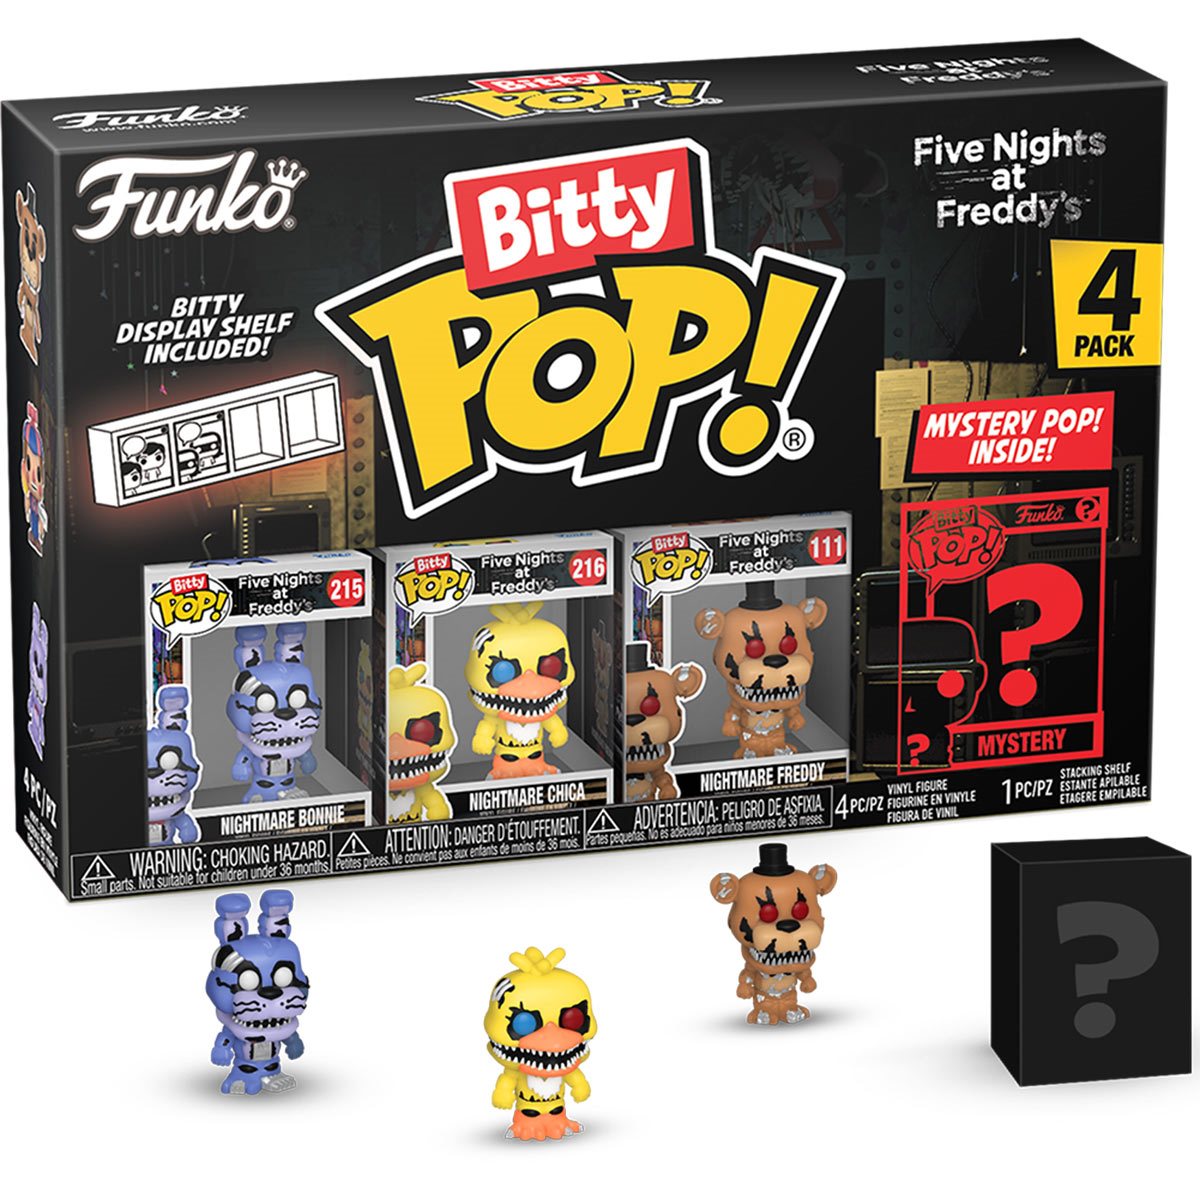 Top-20 Most Valuable Non-Freddy Funko Pop! Figures - Pop Price Guide